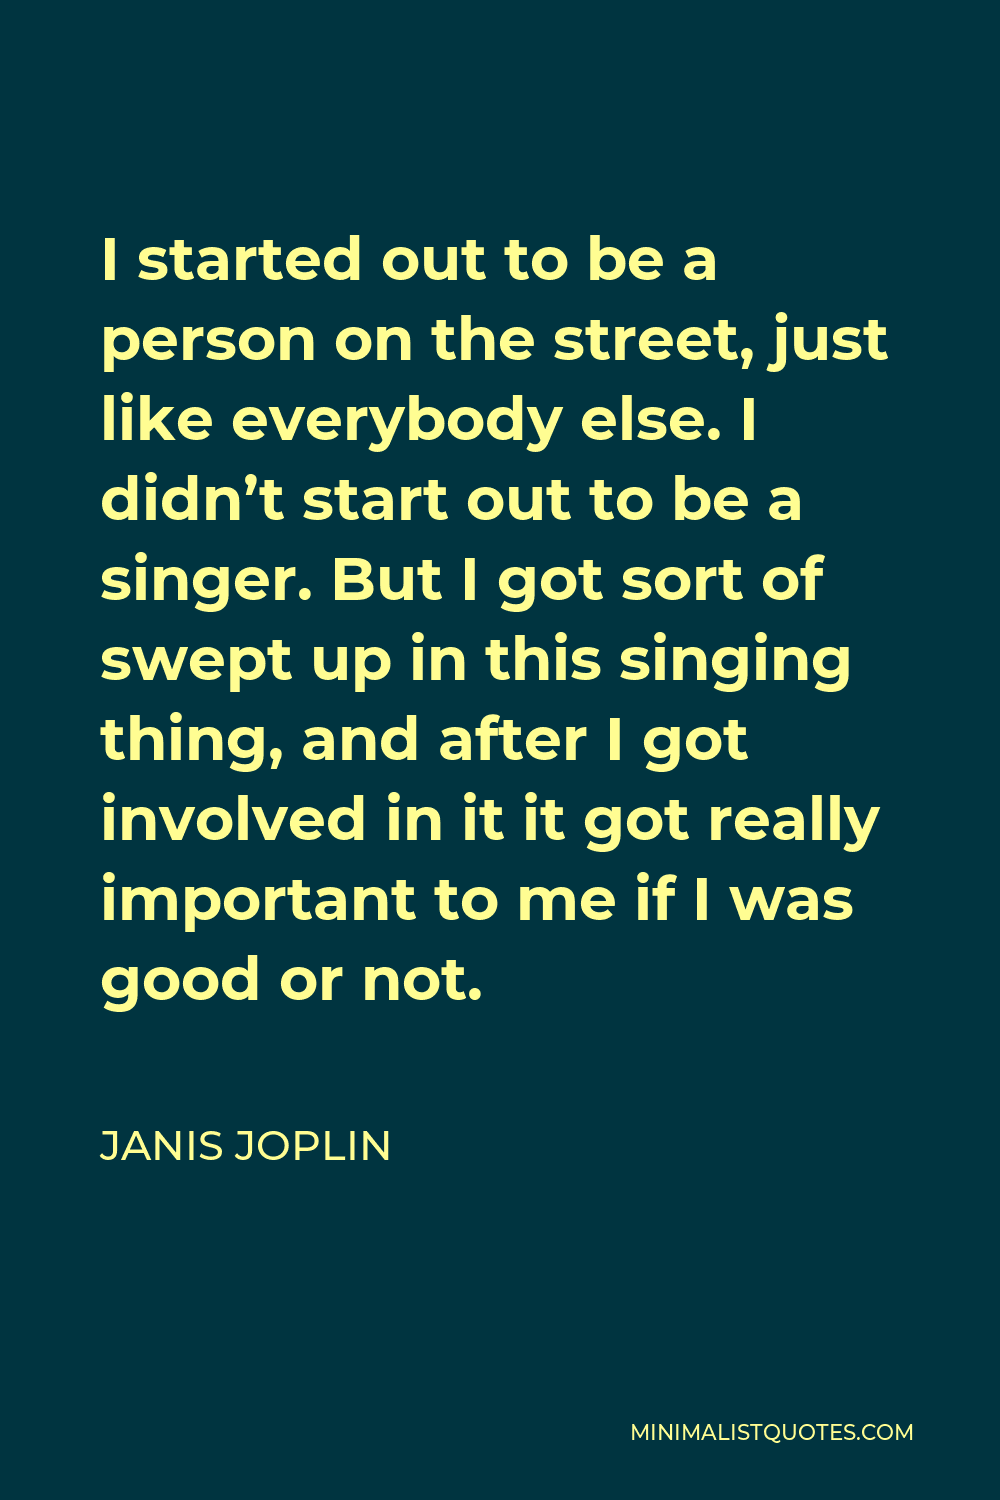 Janis Joplin Quote - I started out to be a person on the street, just like everybody else. I didn’t start out to be a singer. But I got sort of swept up in this singing thing, and after I got involved in it it got really important to me if I was good or not.